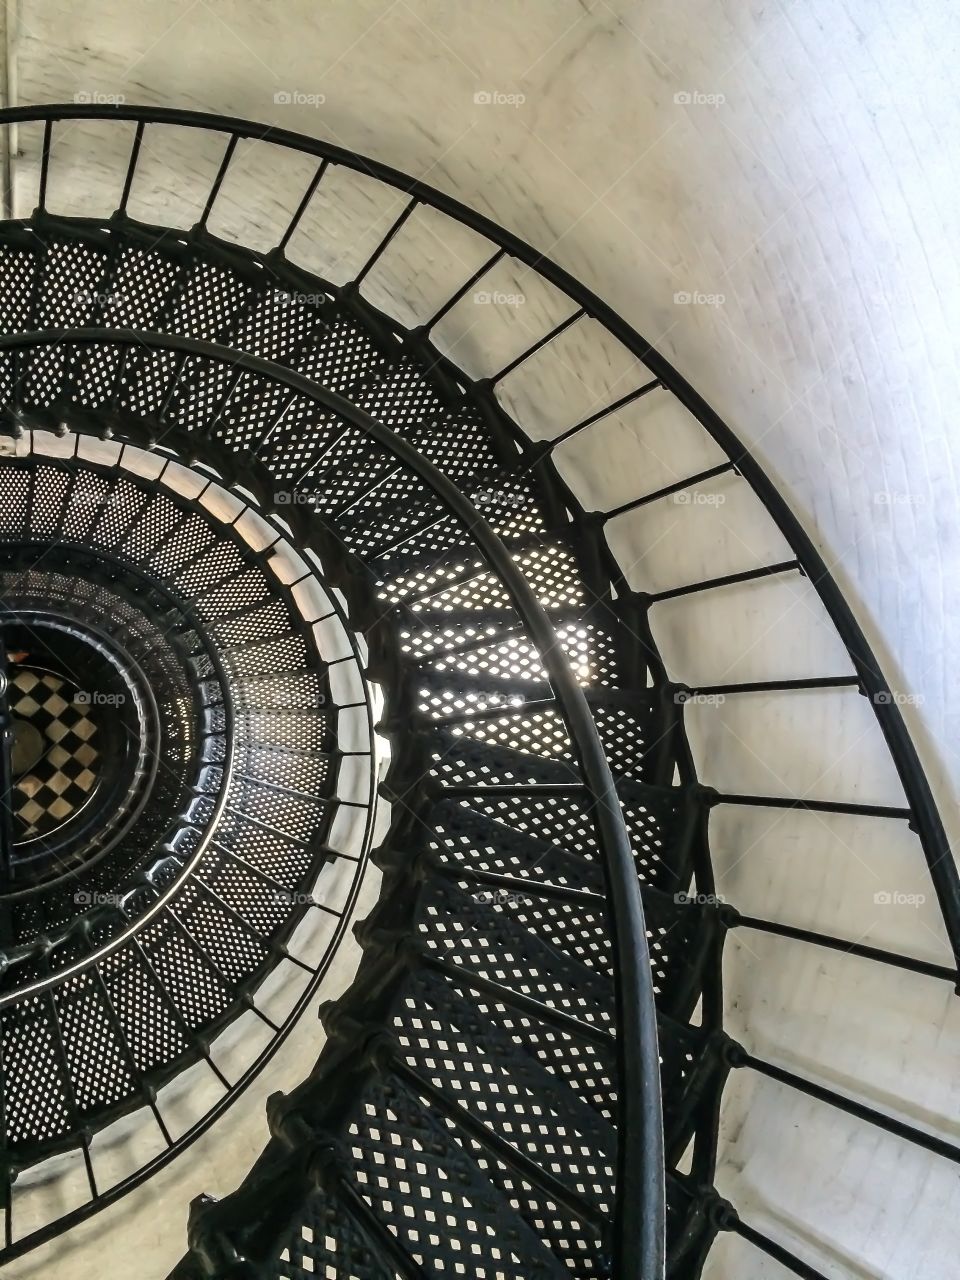 View of metallic spiral staircase